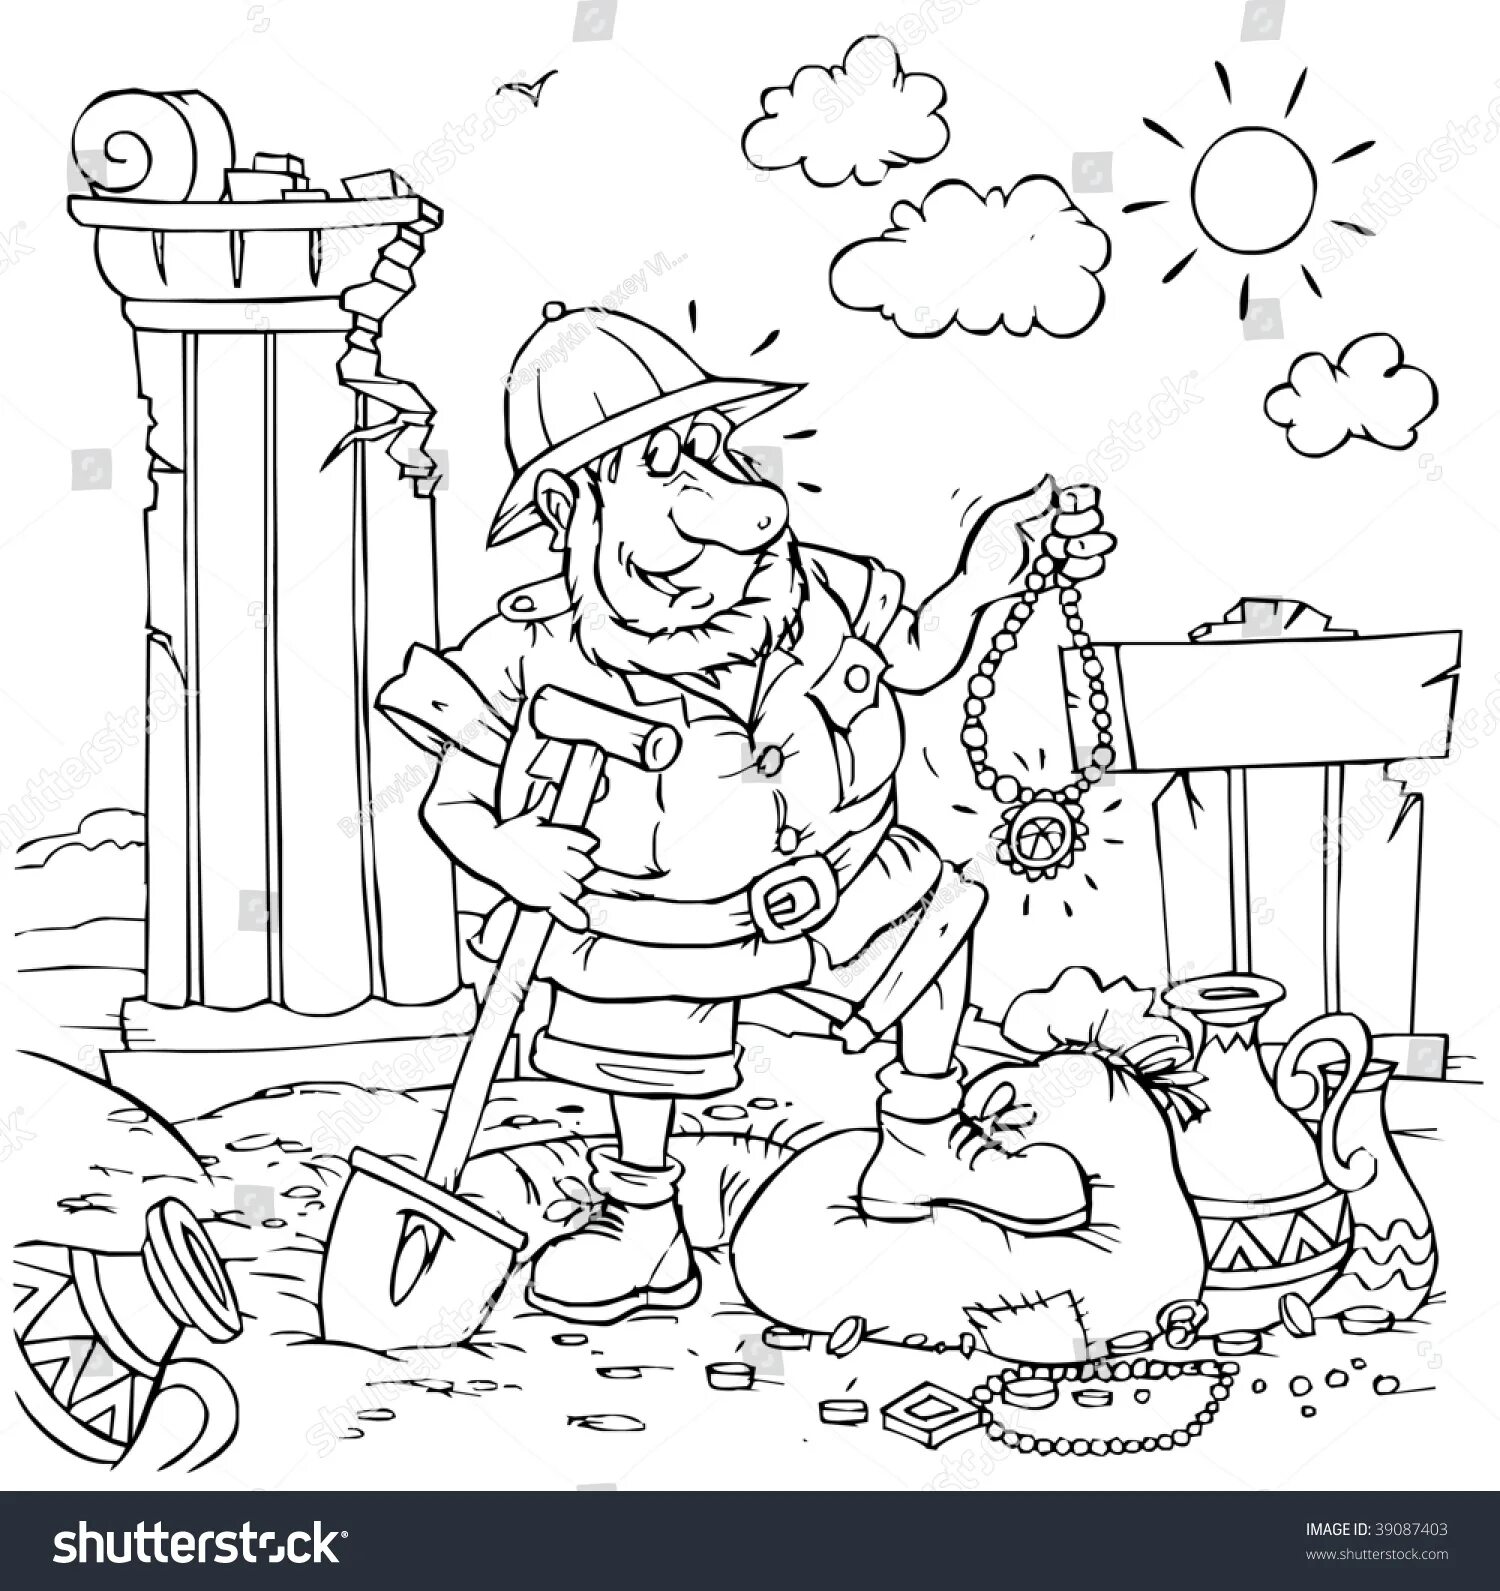 Coloring book kind archaeologist